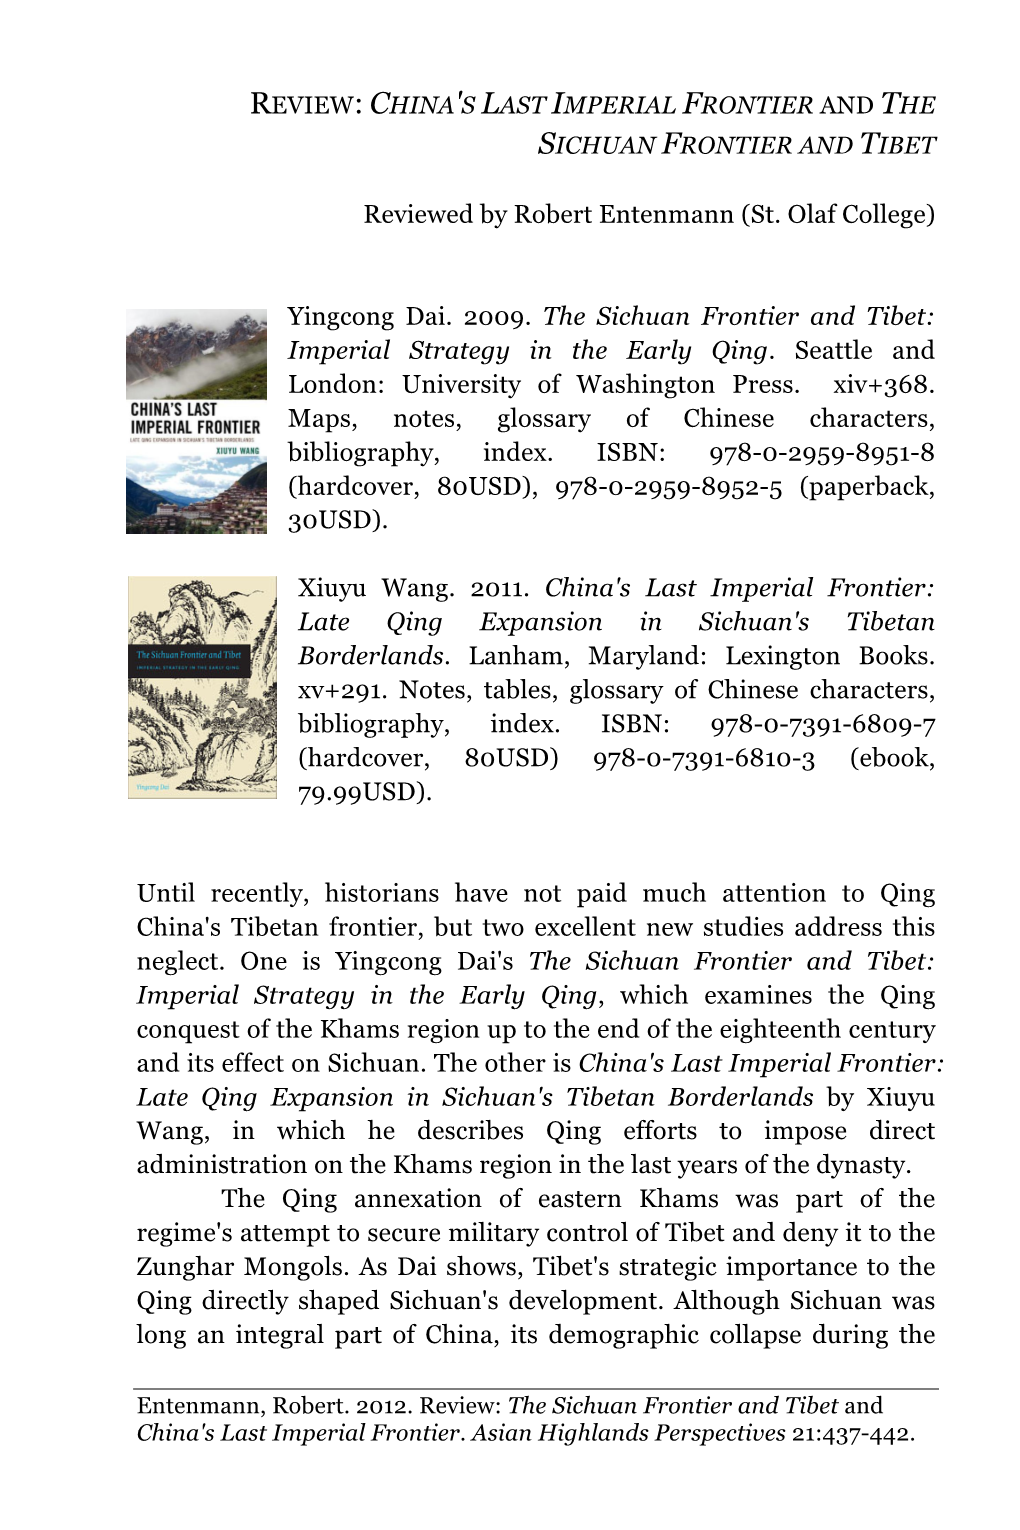 Review: China's Last Imperial Frontier and the Sichuan Frontier and Tibet